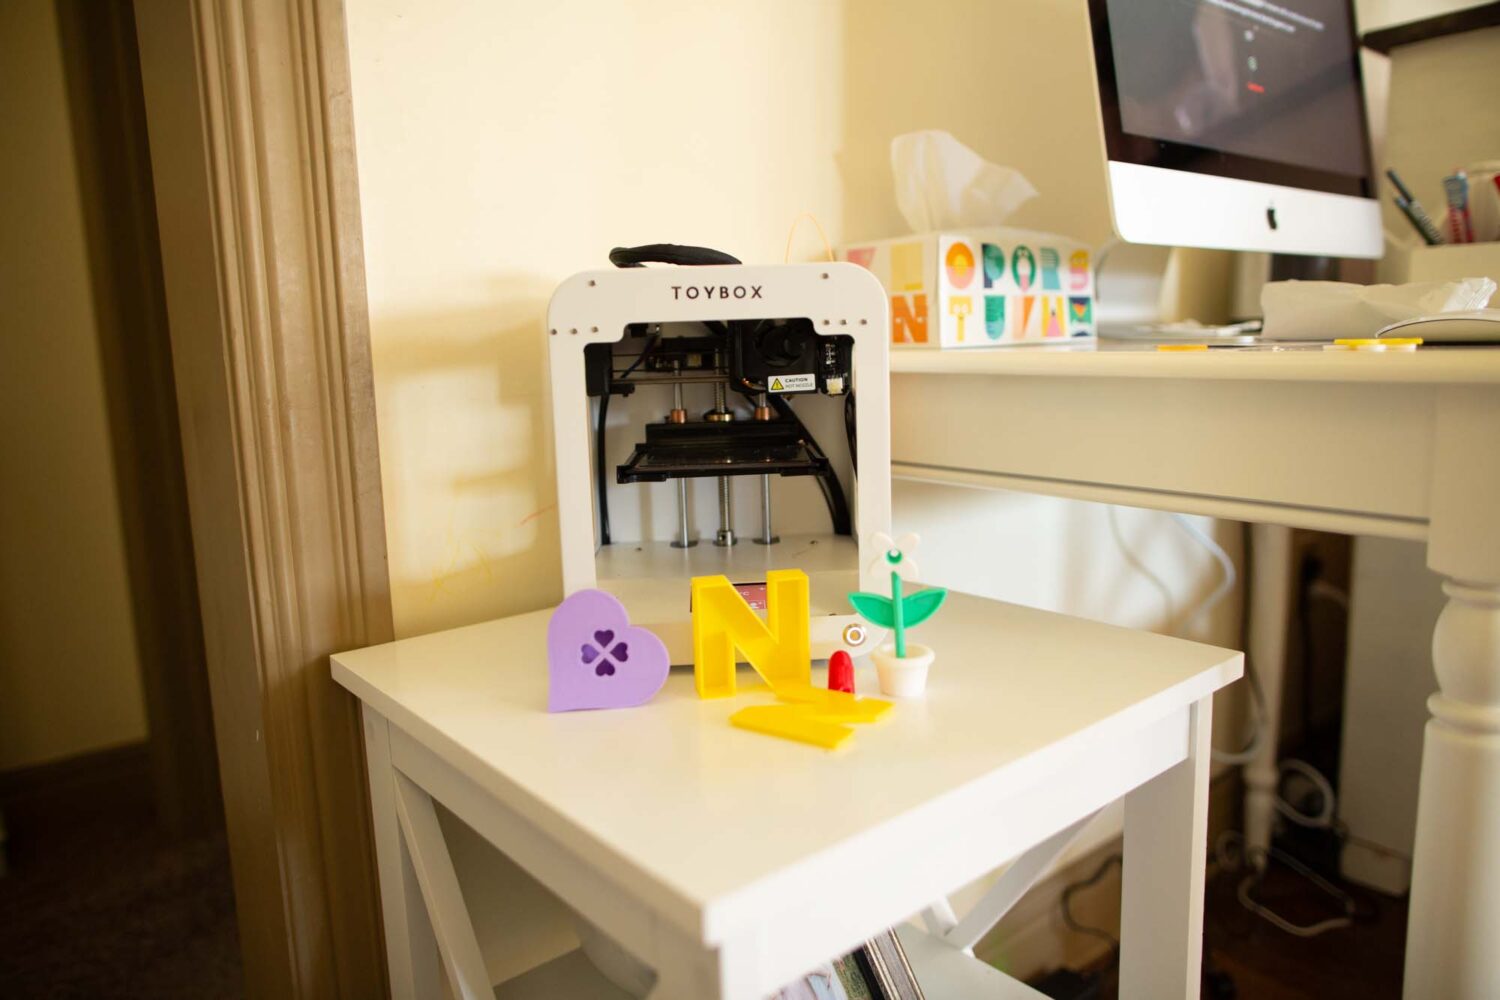 show and tell ideas for 3d printing for kids